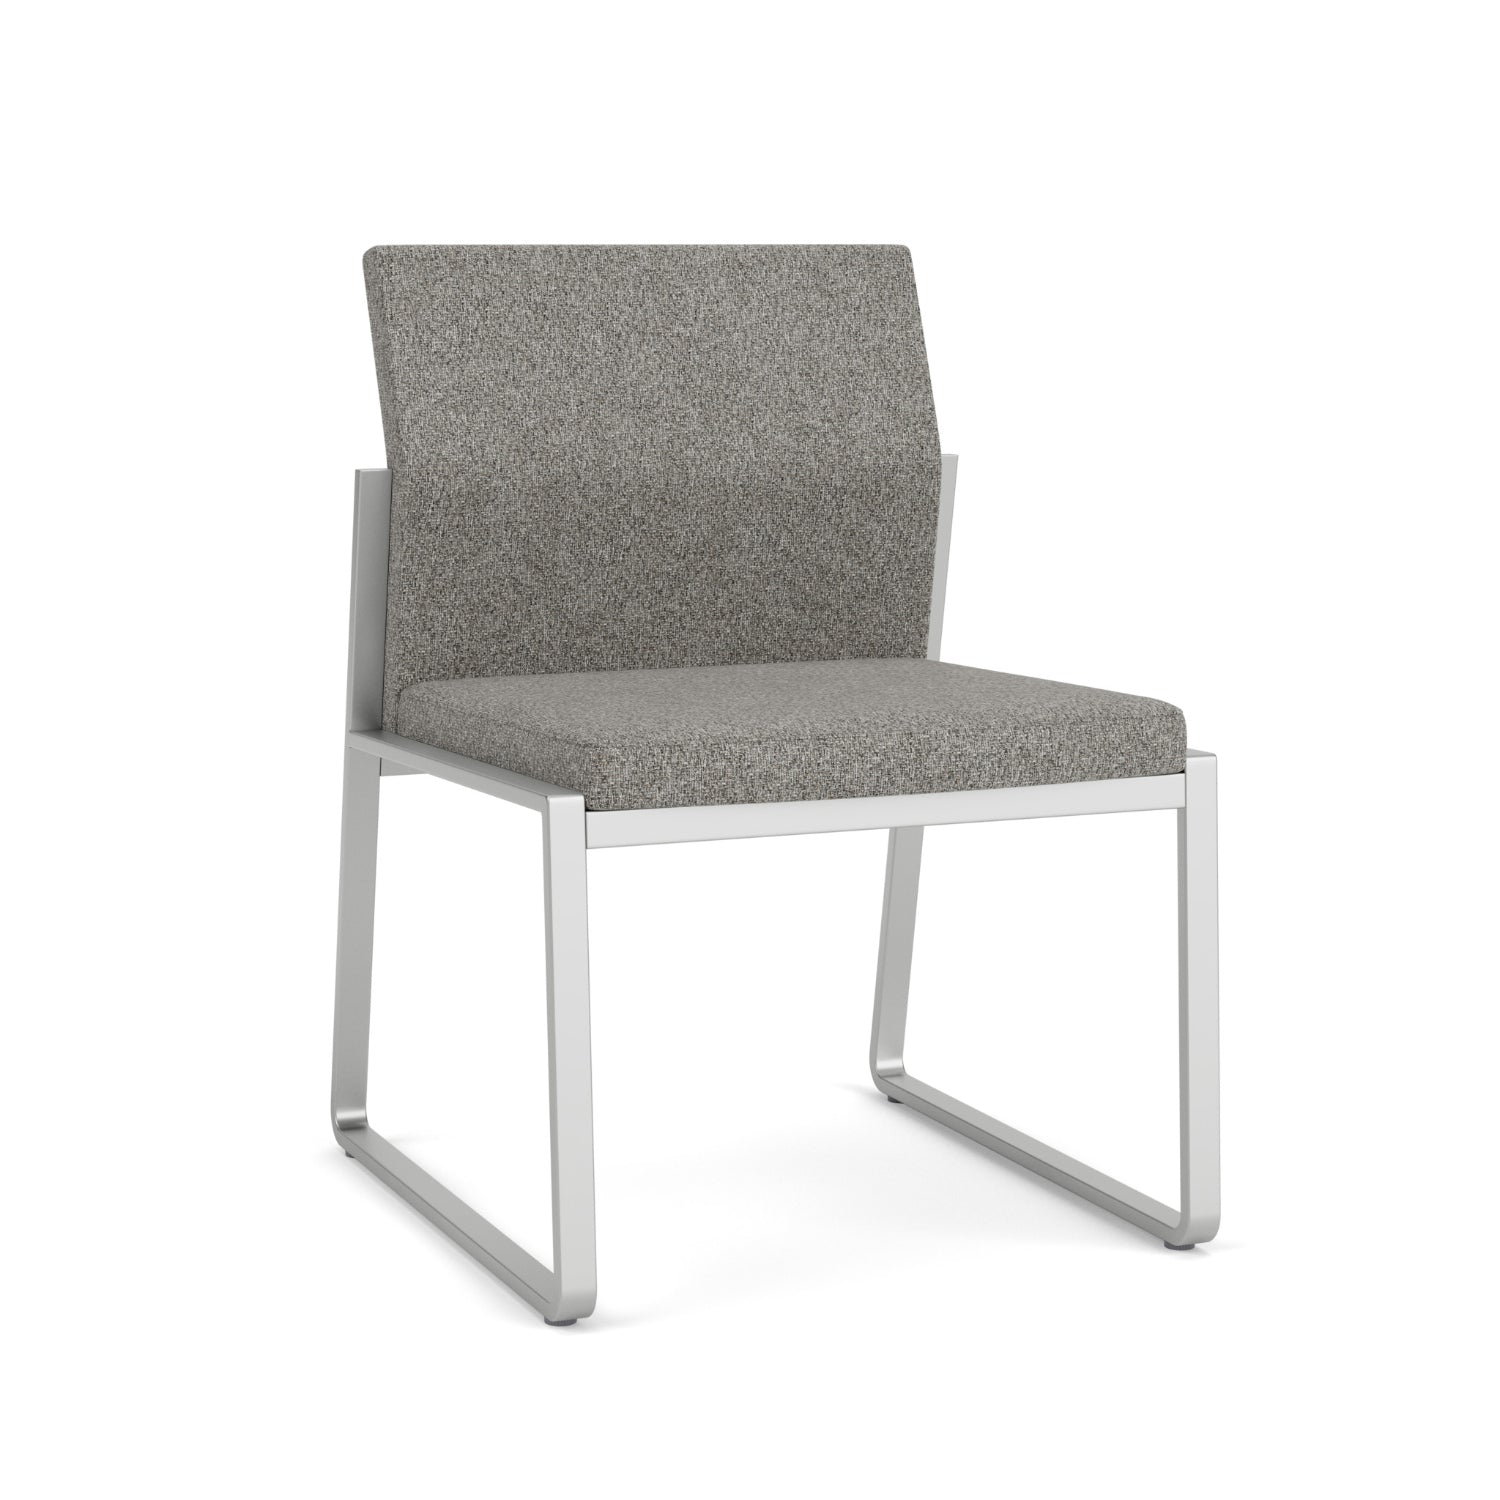 Gansett Collection Reception Seating, Armless Guest Chair, Standard Fabric Upholstery, FREE SHIPPING